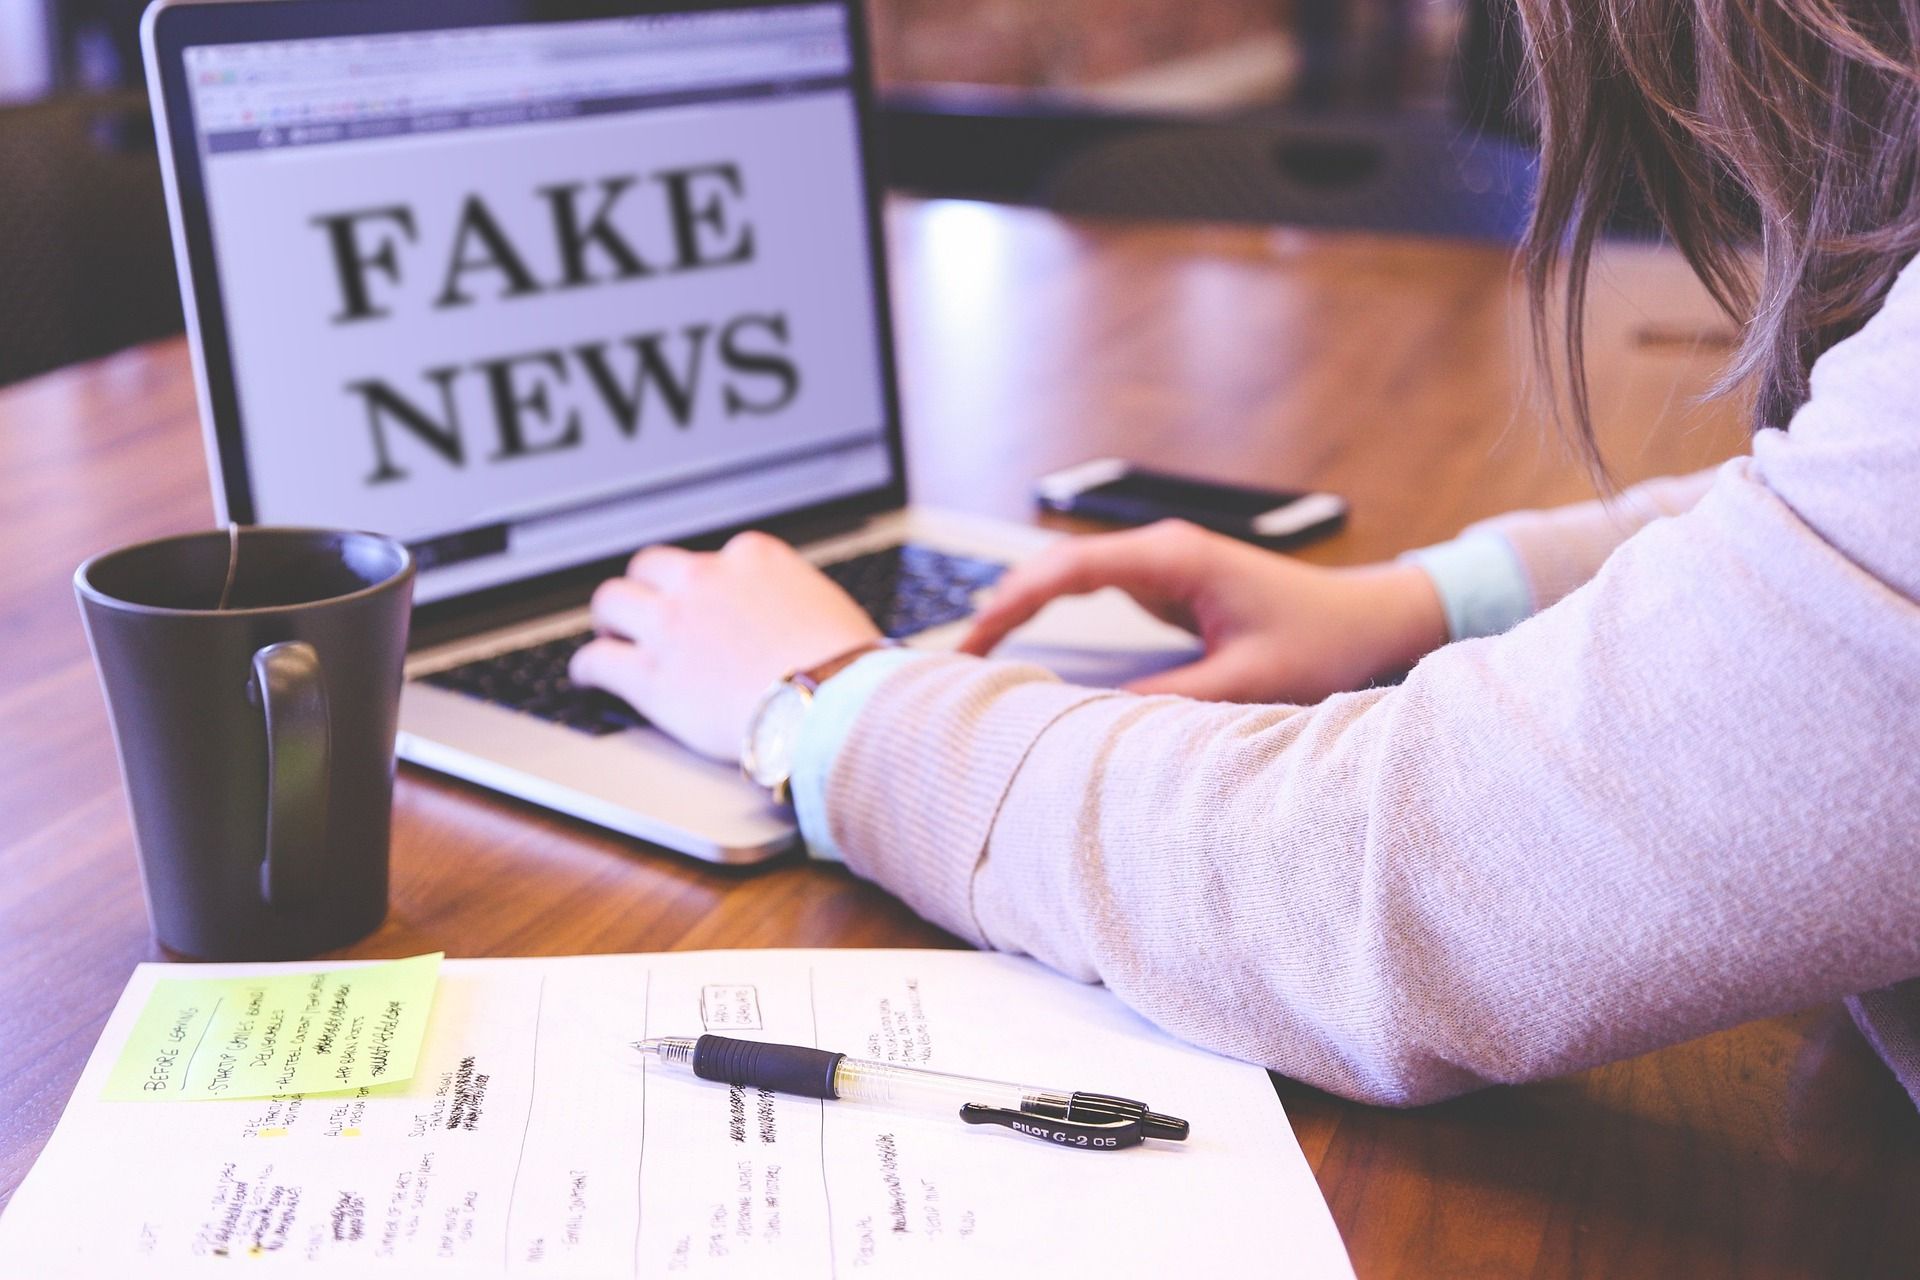 Cultural background: Almost half of Danes worry that their perspectives are skewed by 'fake news'